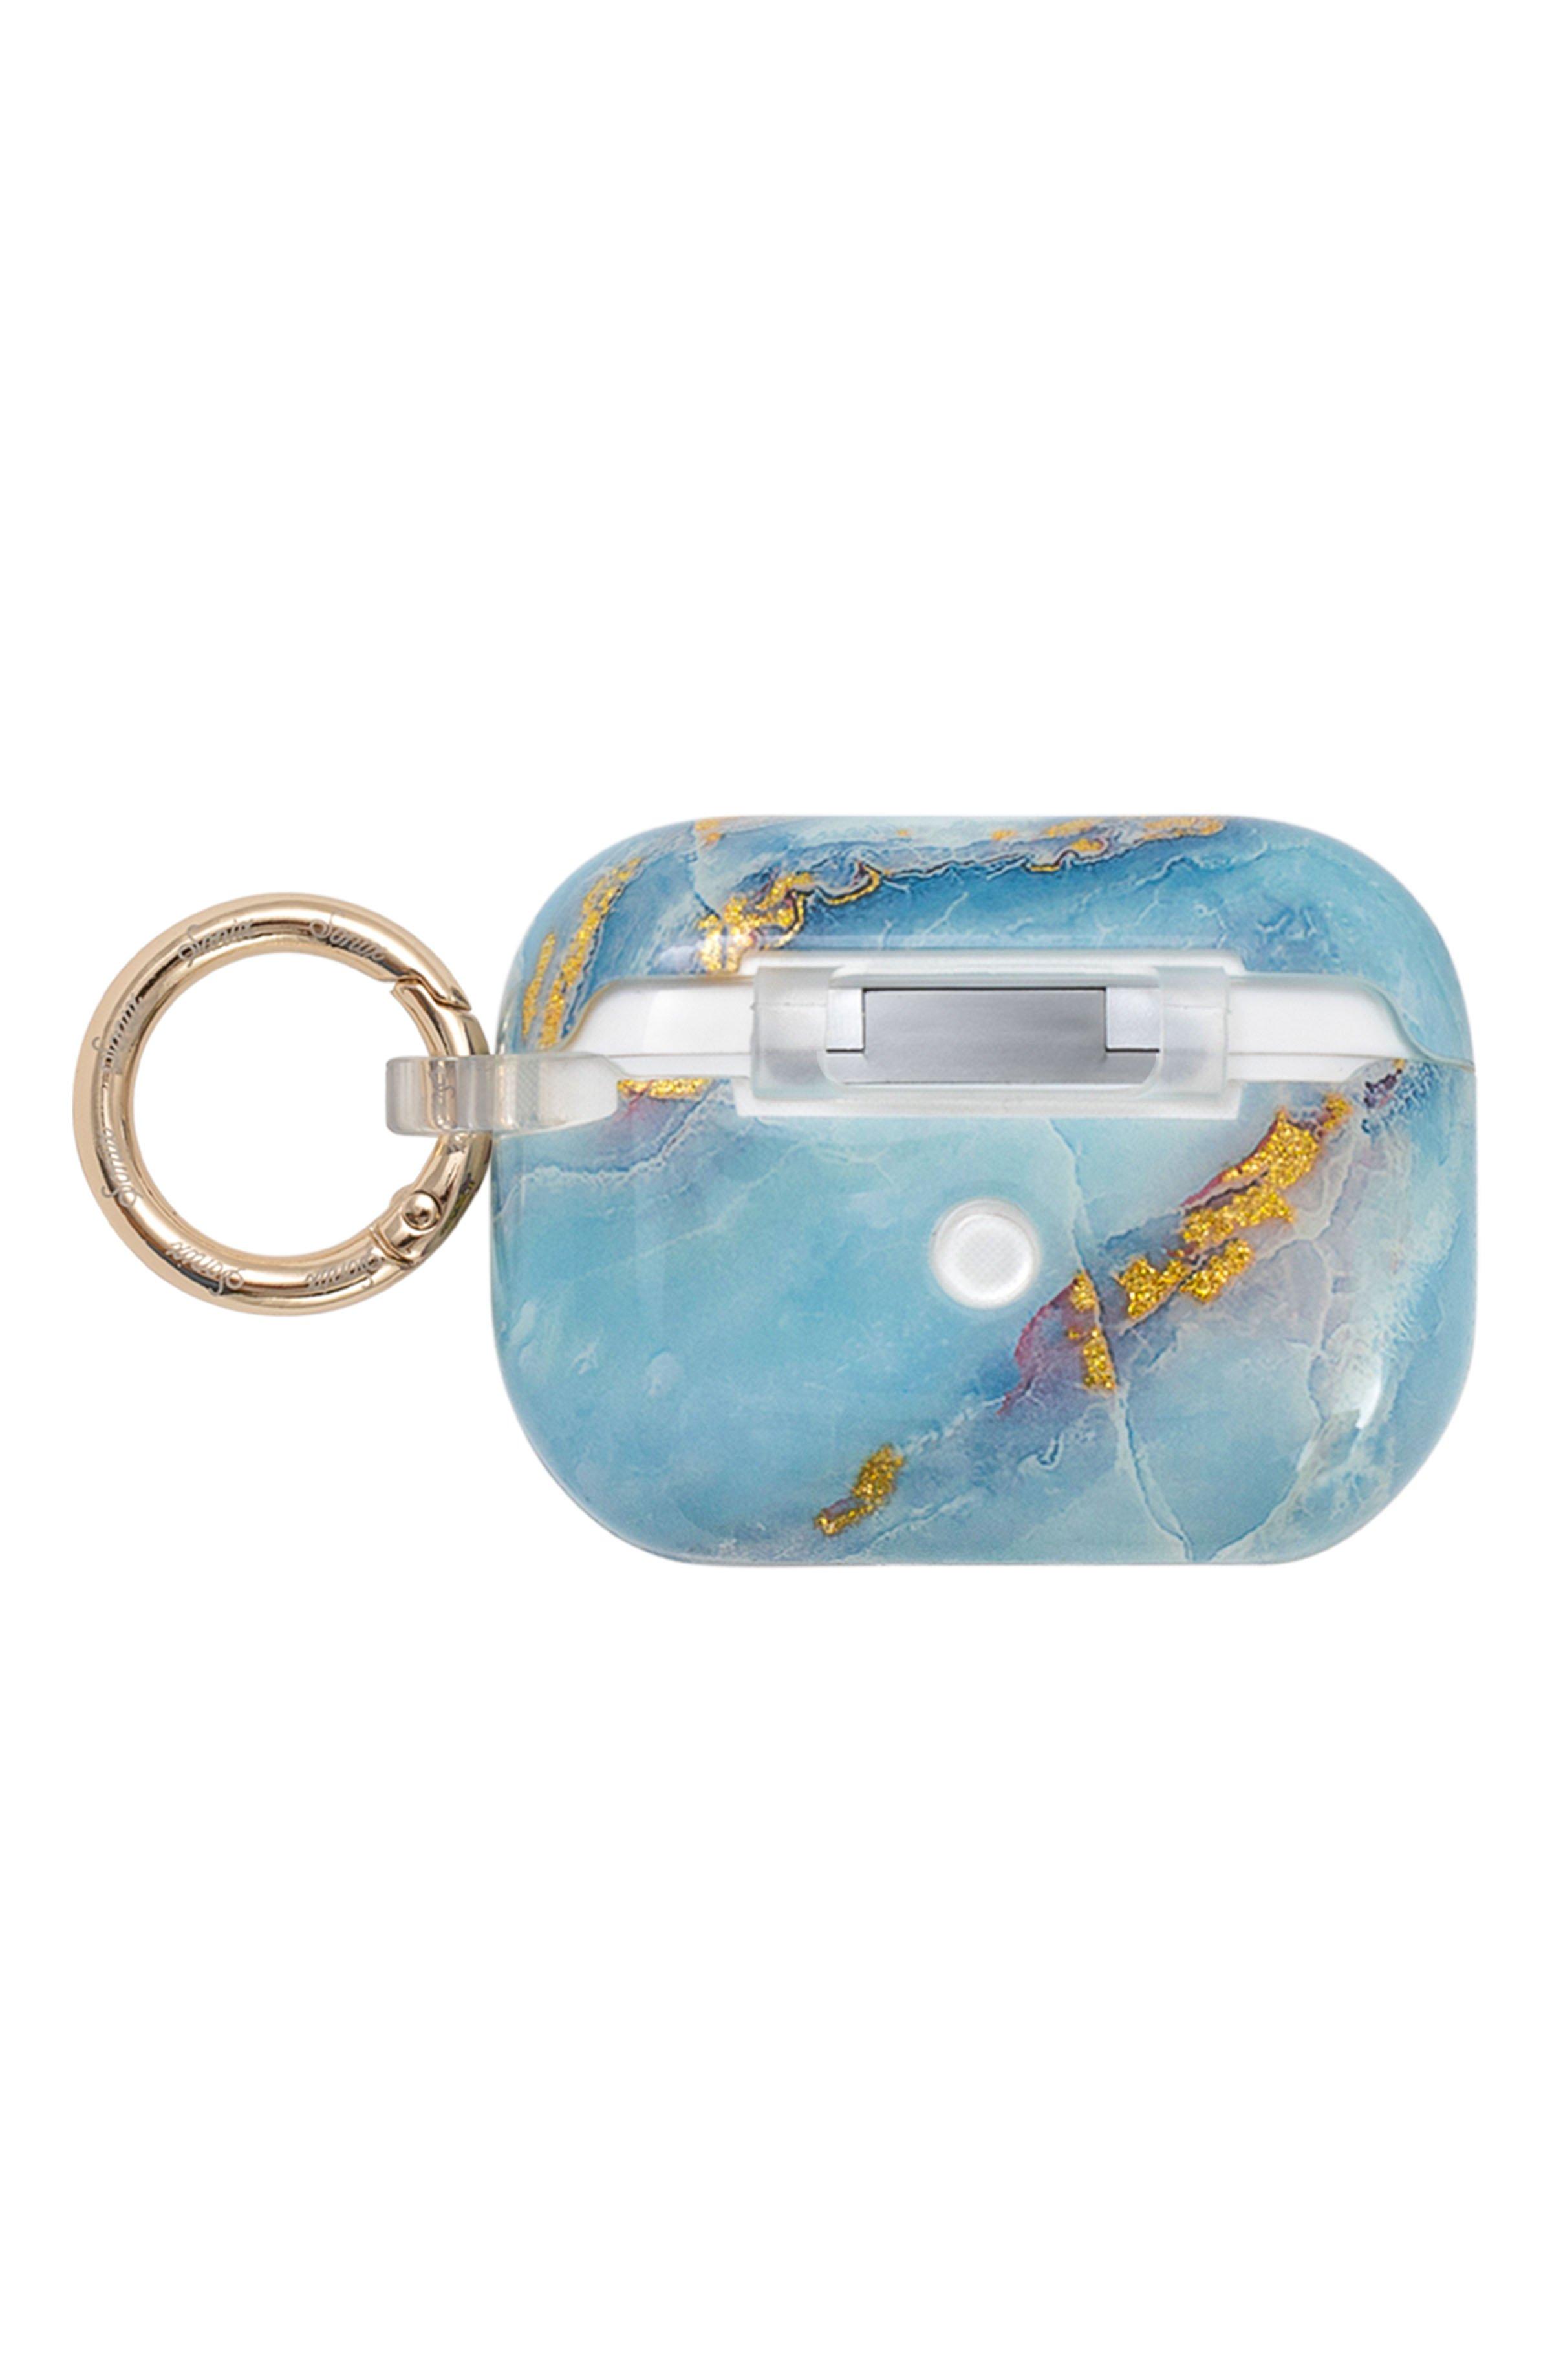 AirPods Pro Microbes Art Case Cover